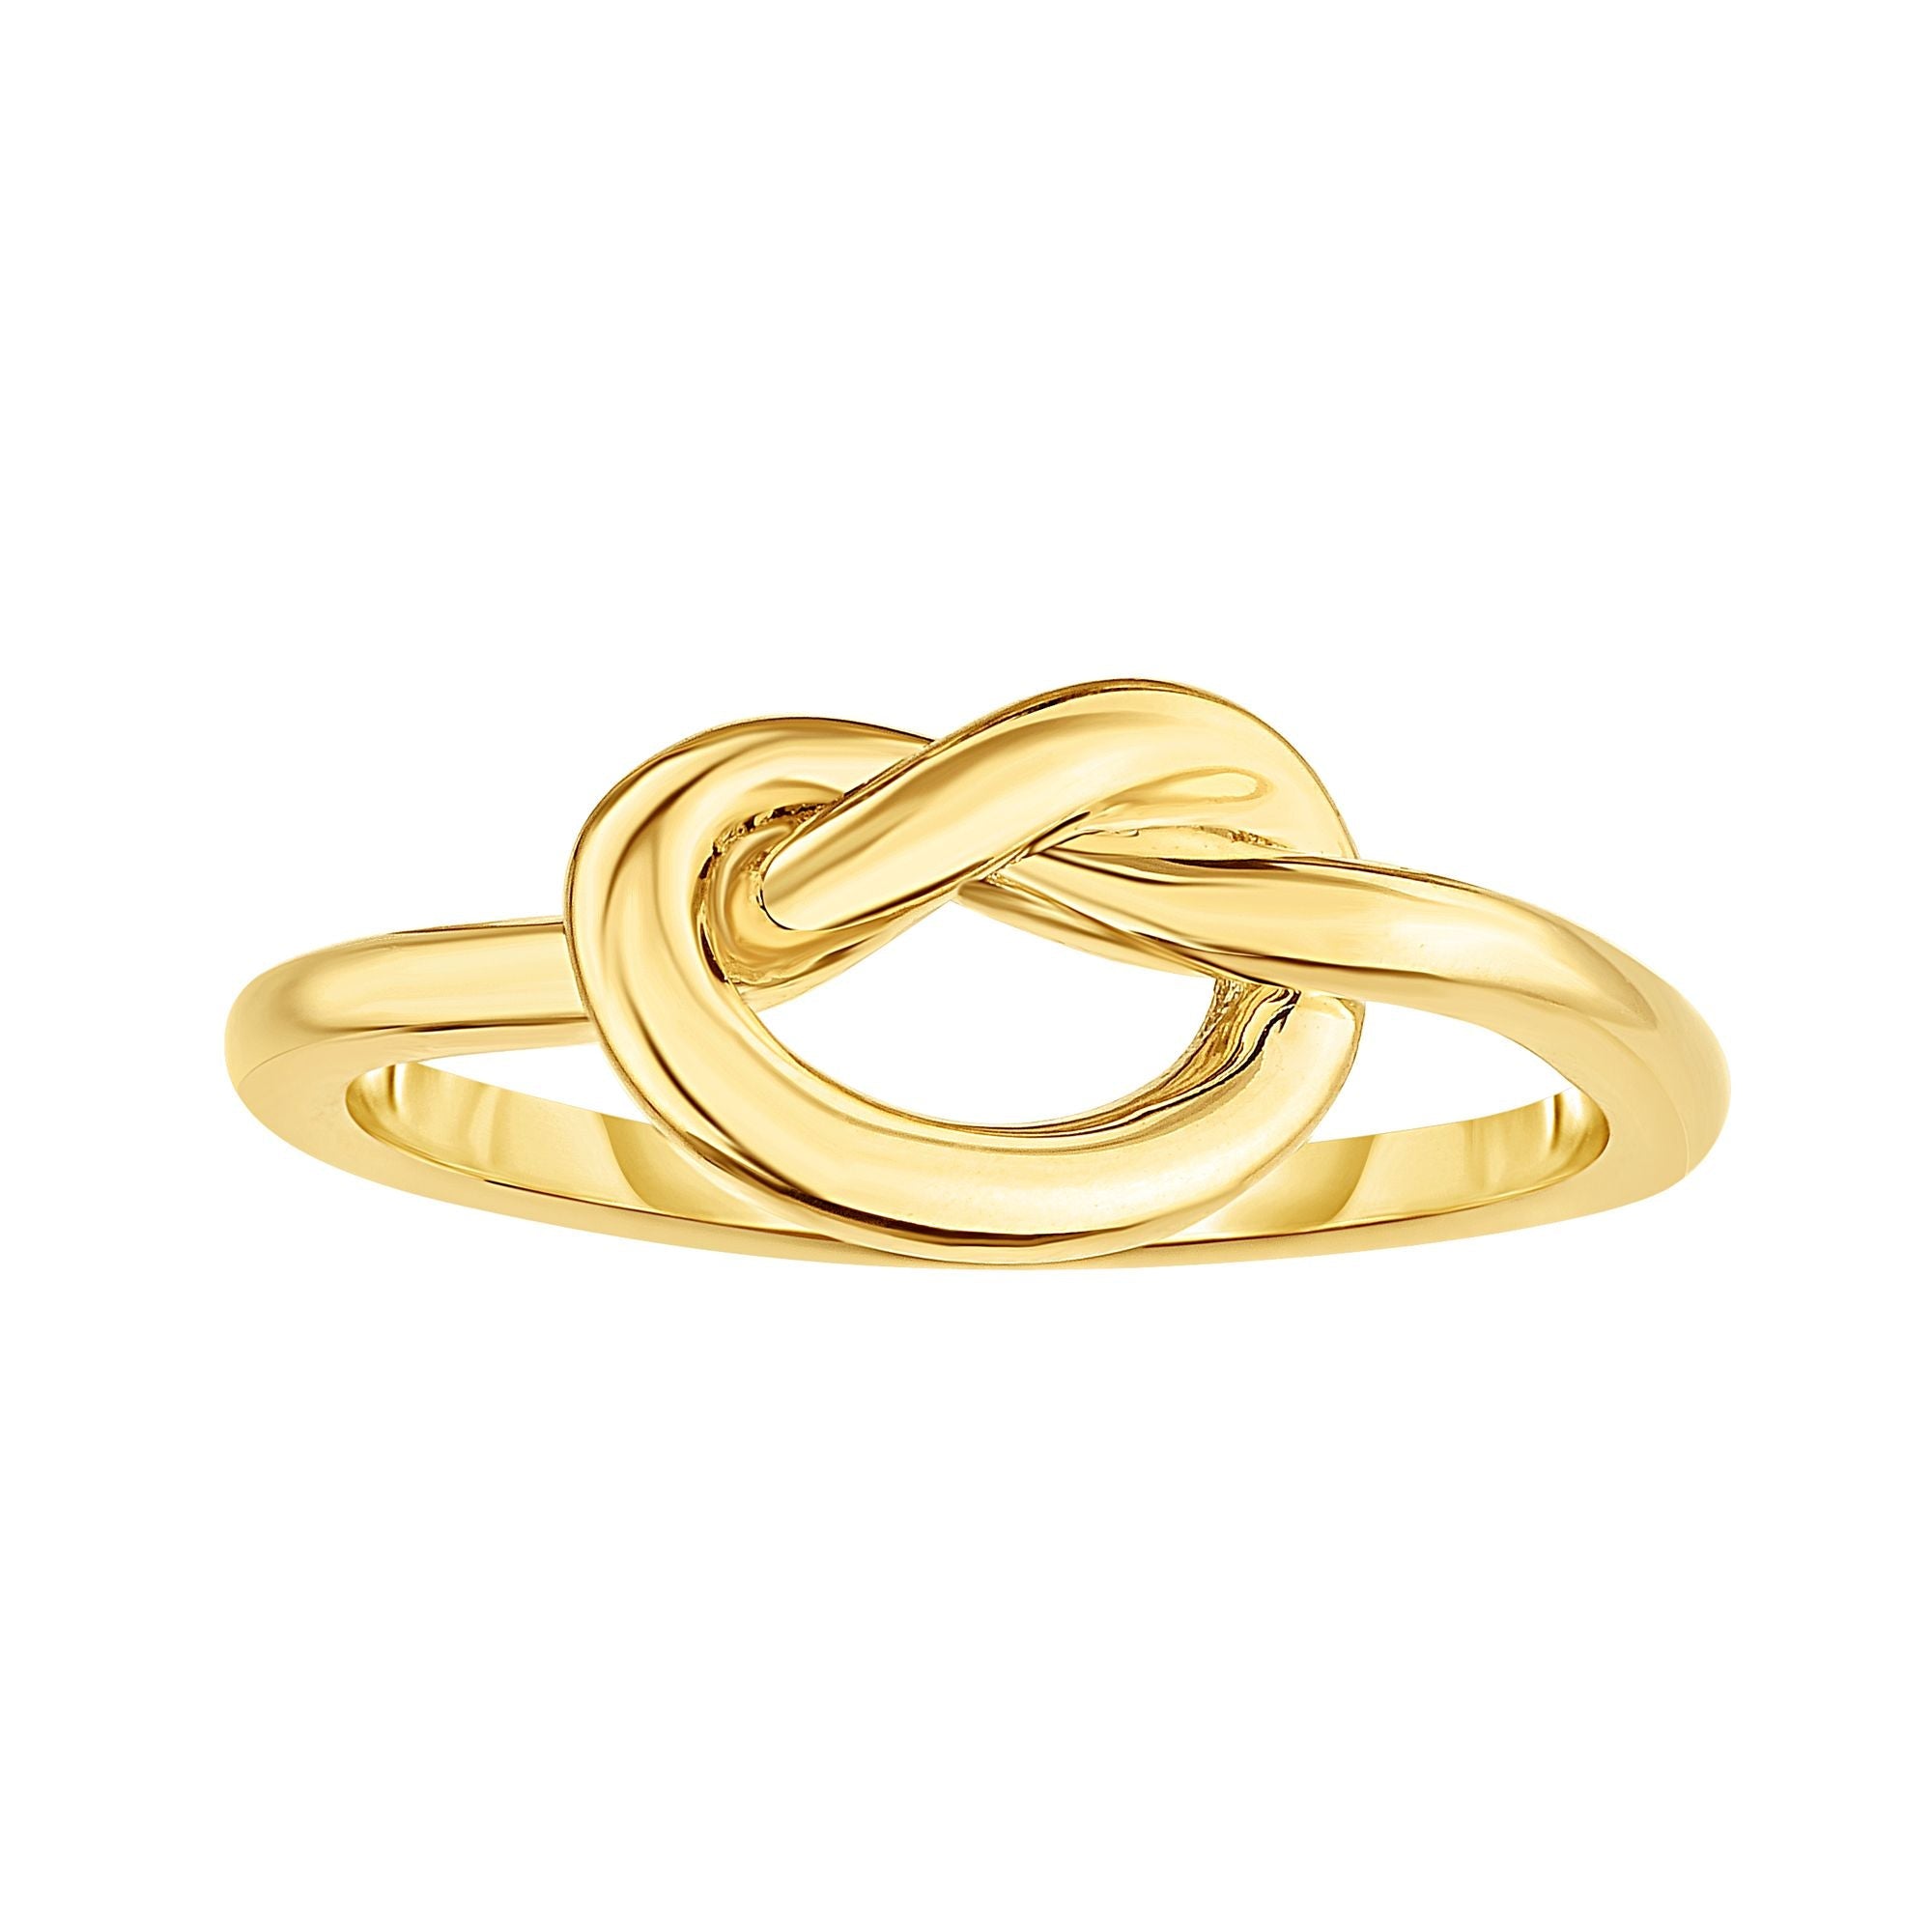 Maritime Knot Ring by George Francis